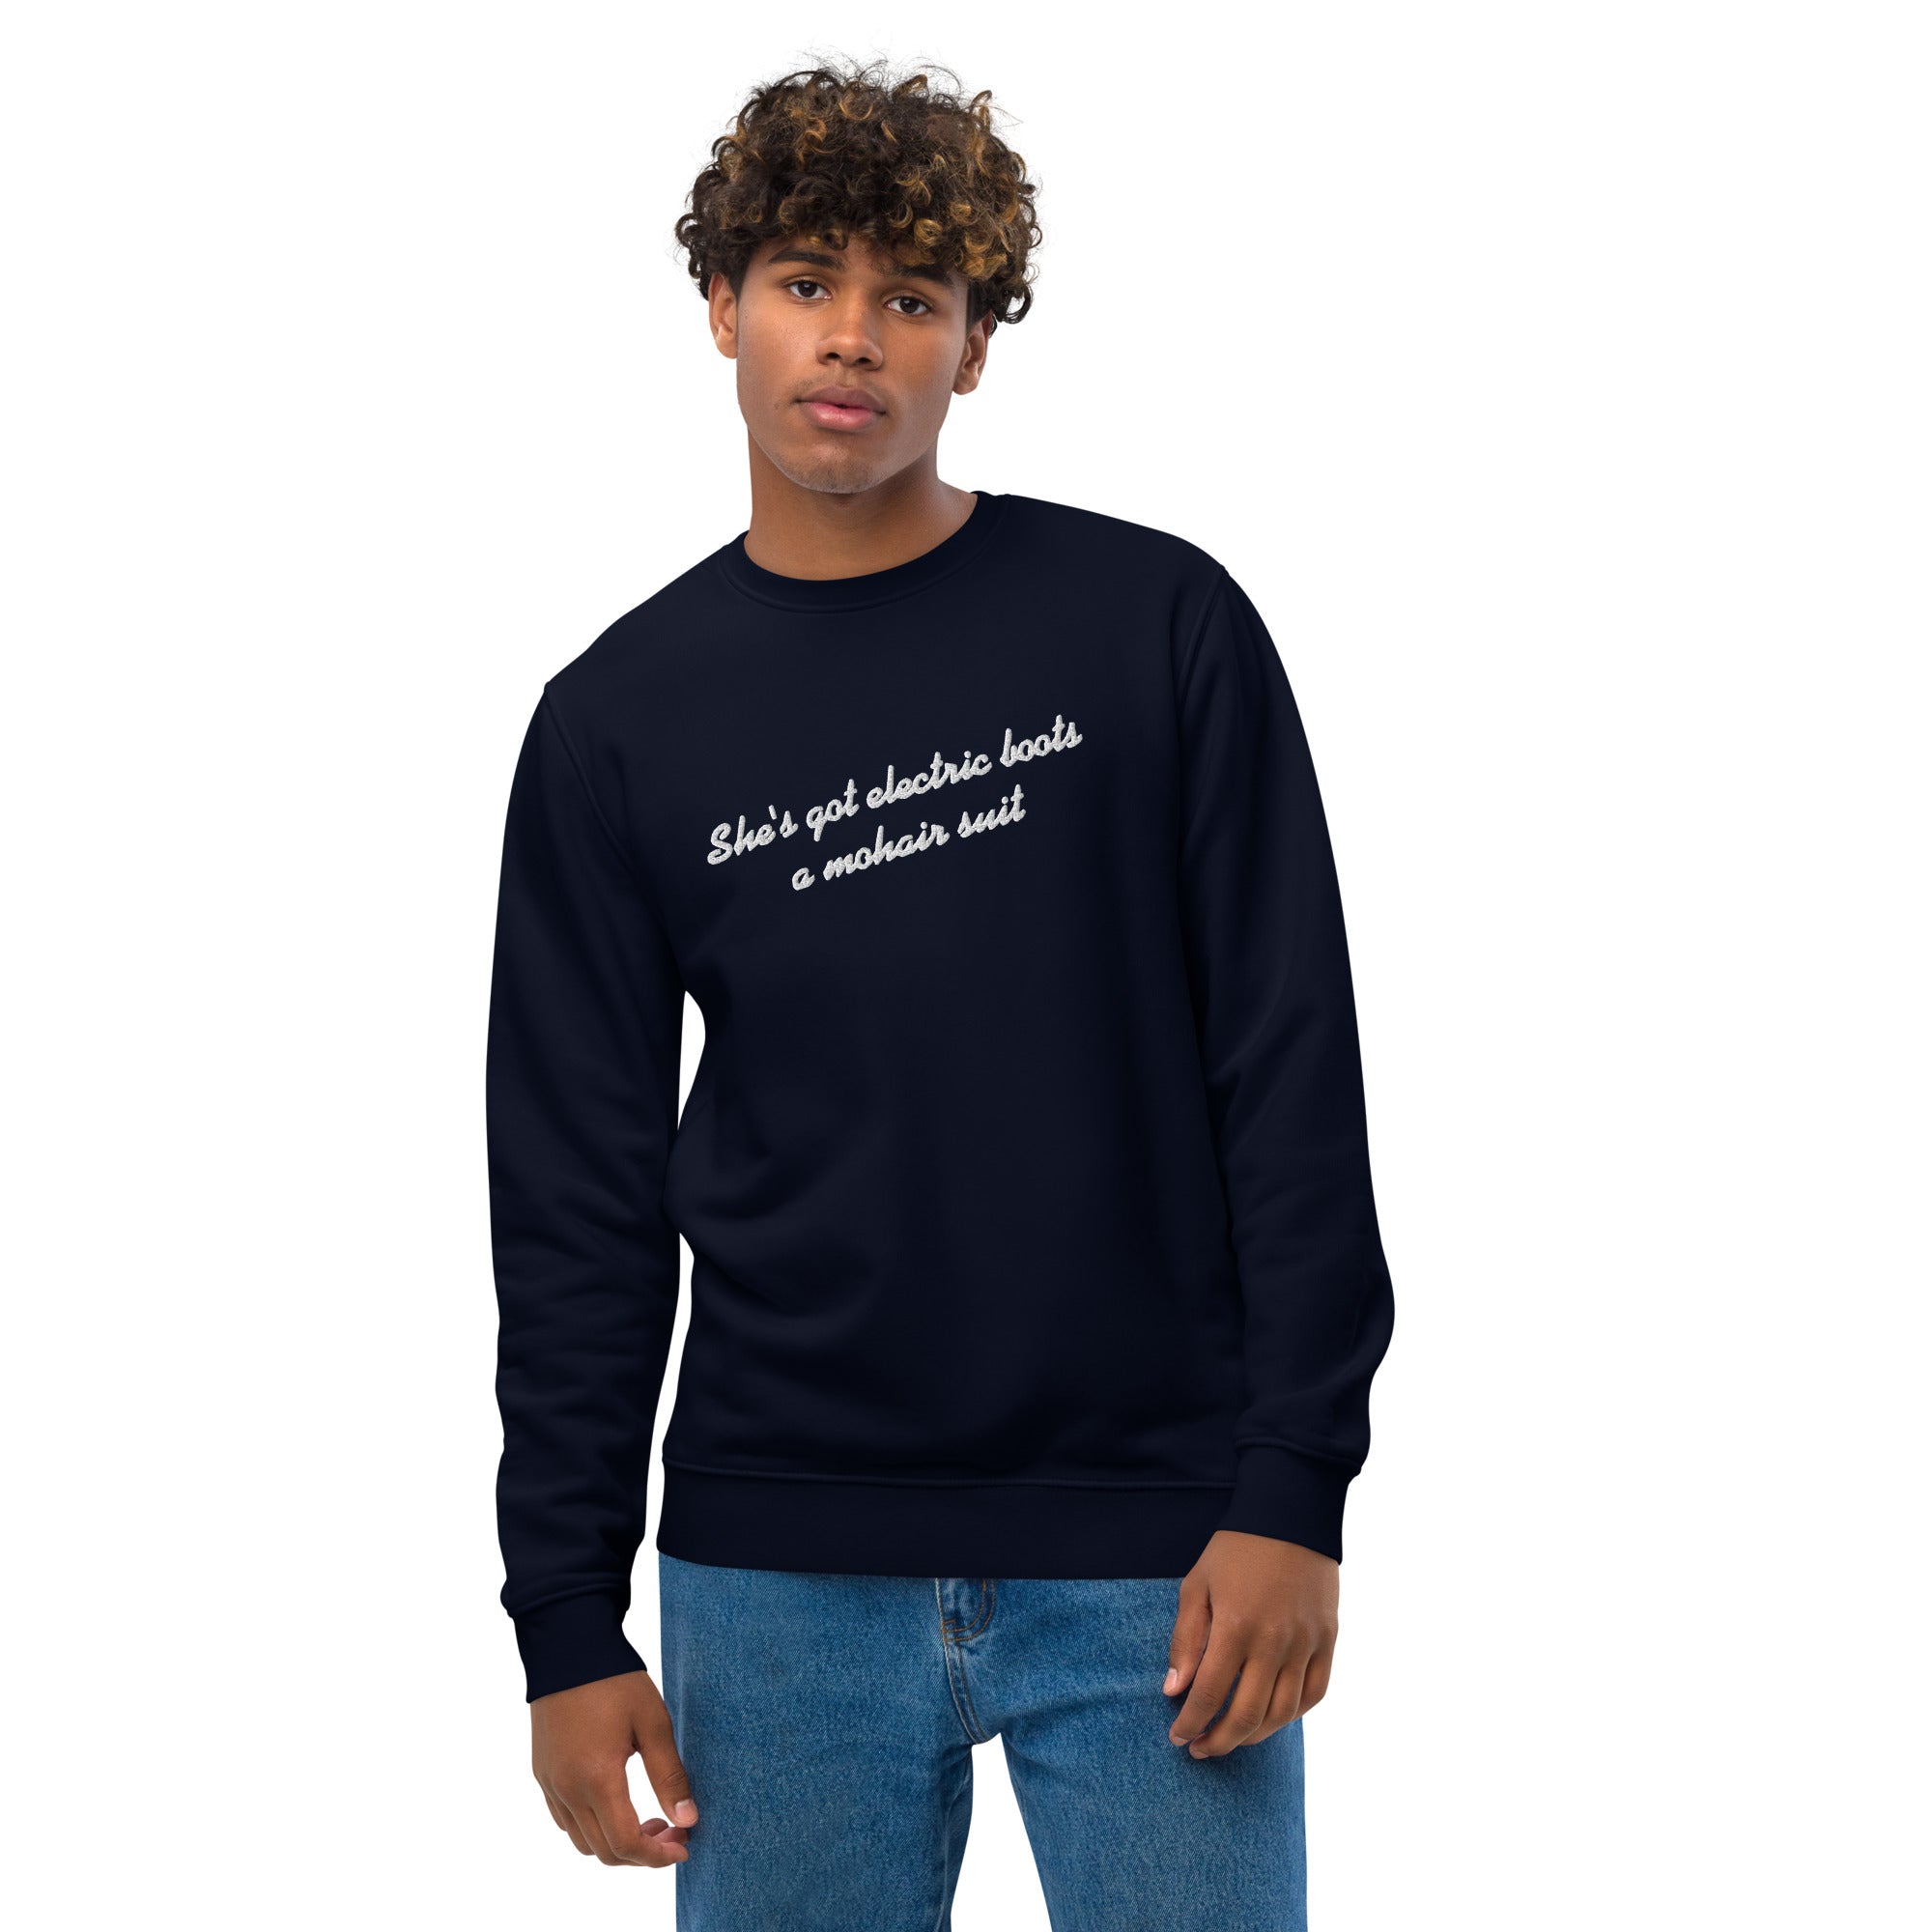 SHE'S GOT ELECTRIC BOOTS A MOHAIR SUIT Embroidered Unisex Organic Sweatshirt (white text)